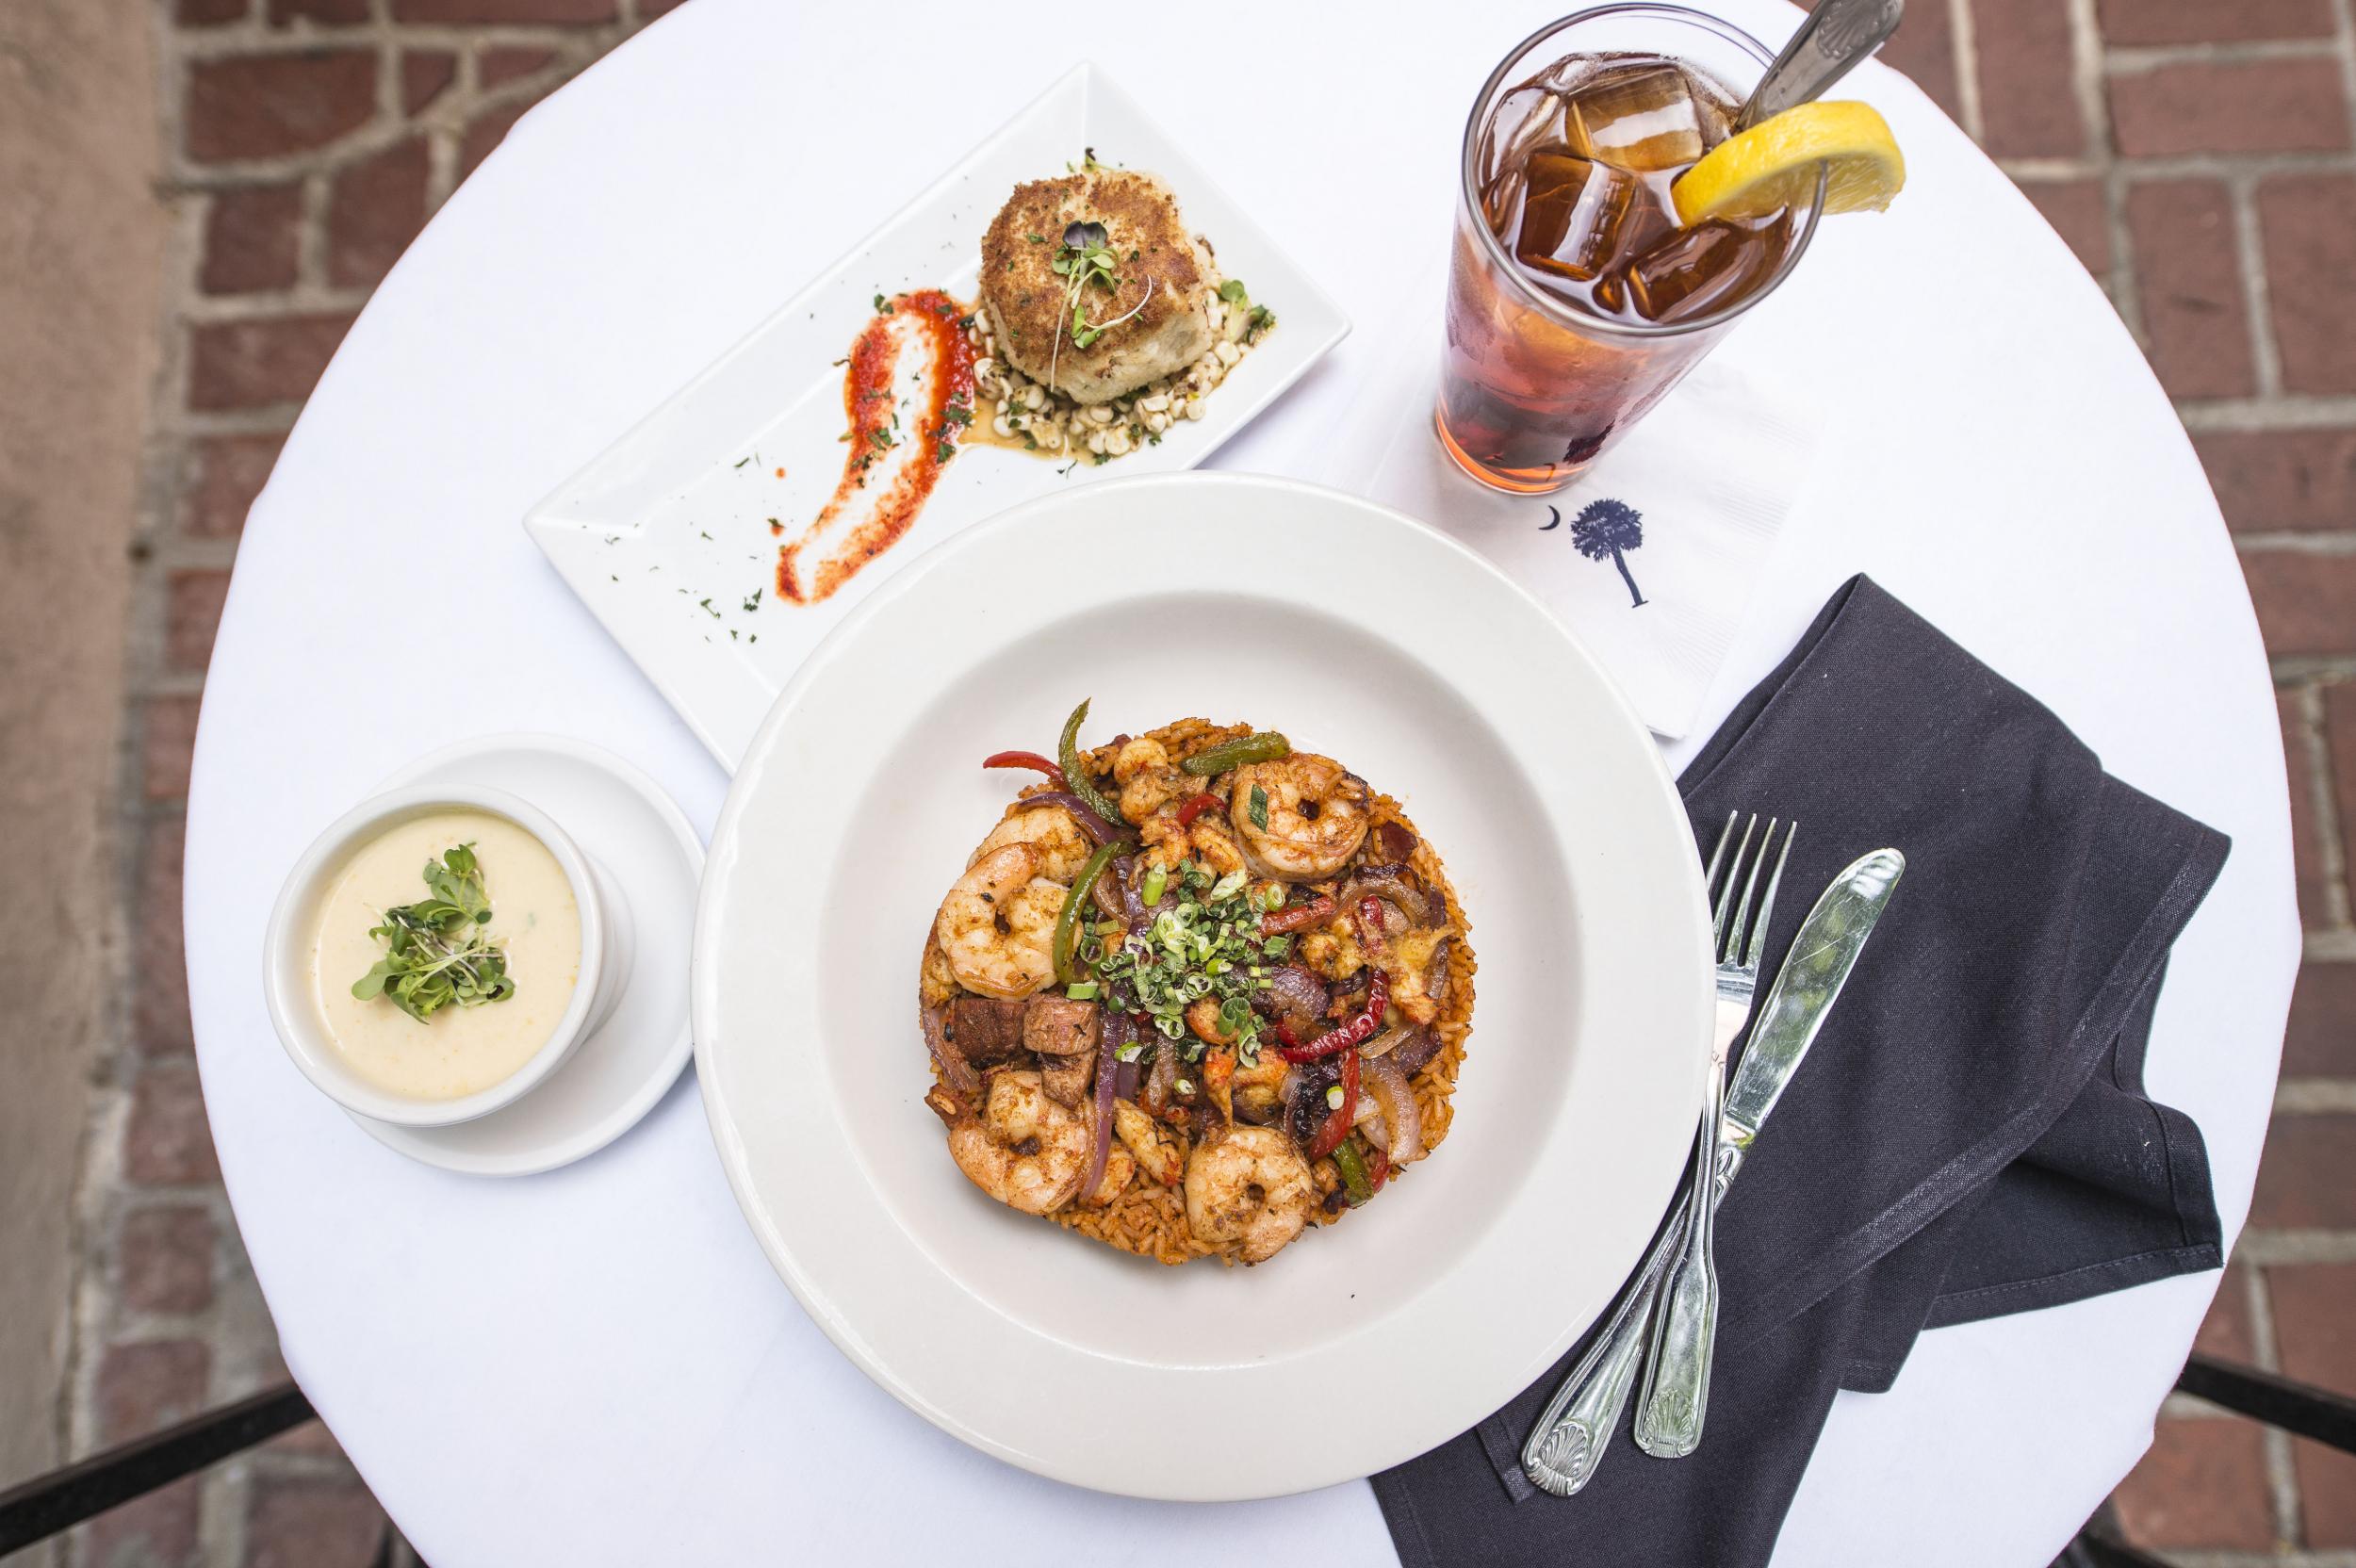 Your trip won’t be complete without trying shrimp and grits